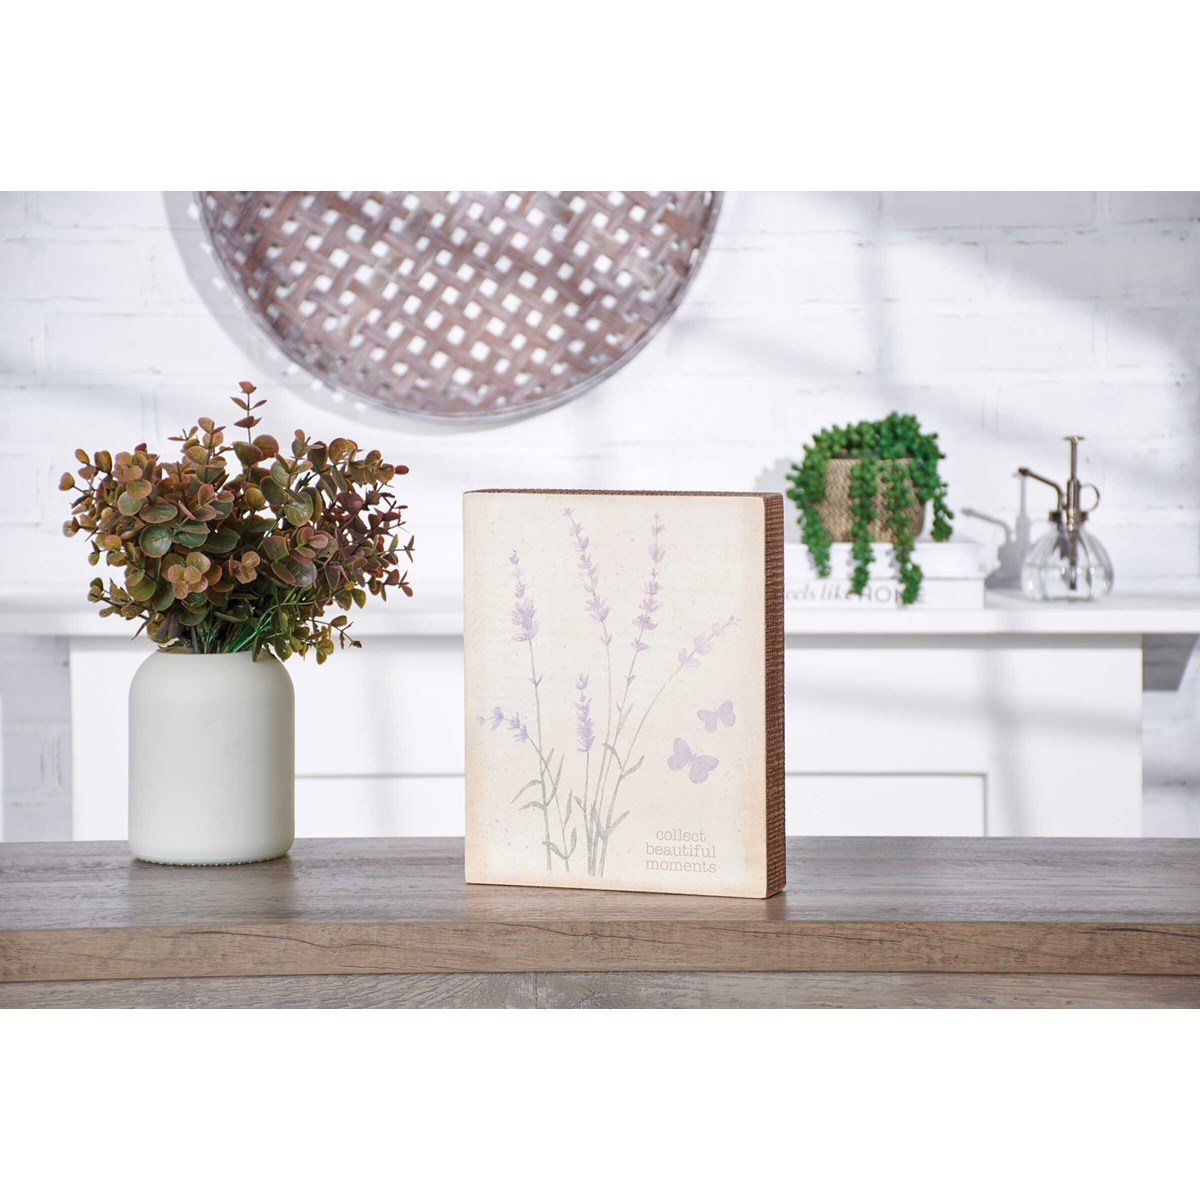 Collect Beautiful Moments Box Sign - Wood, Paper